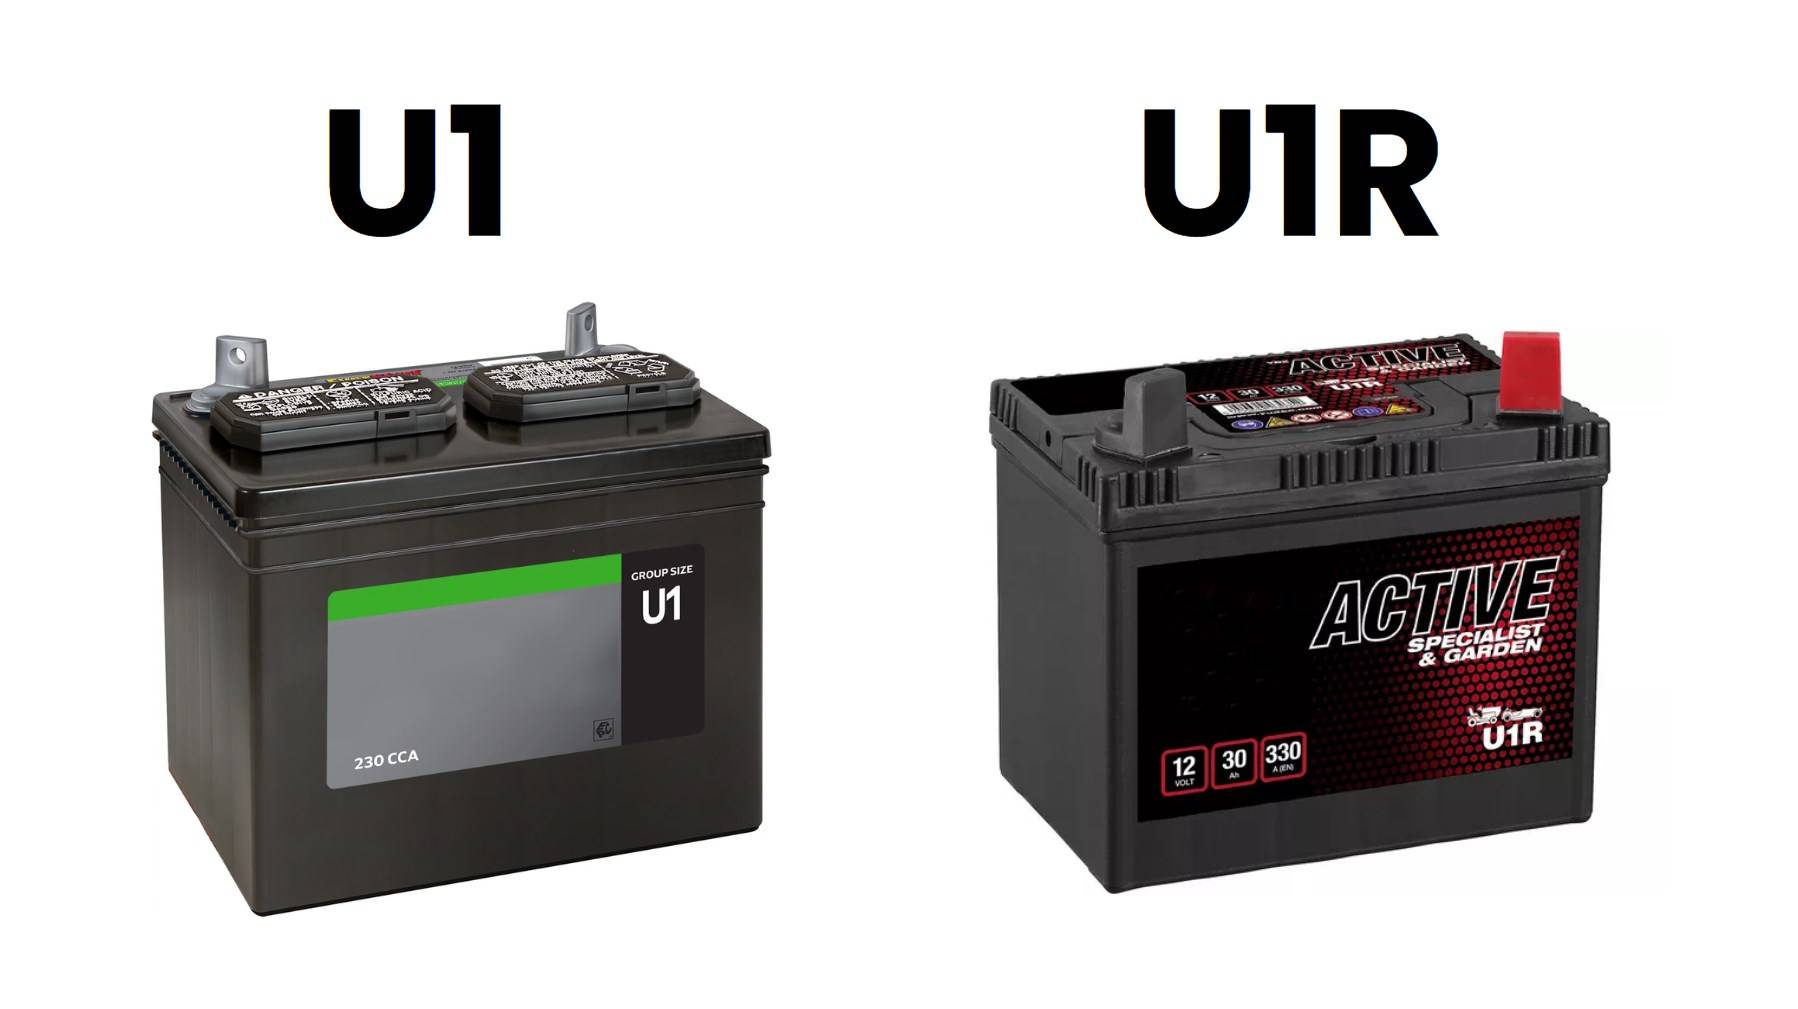 BCI Group U1 and U1R for Industrial Use, Commercial Battery Solutions